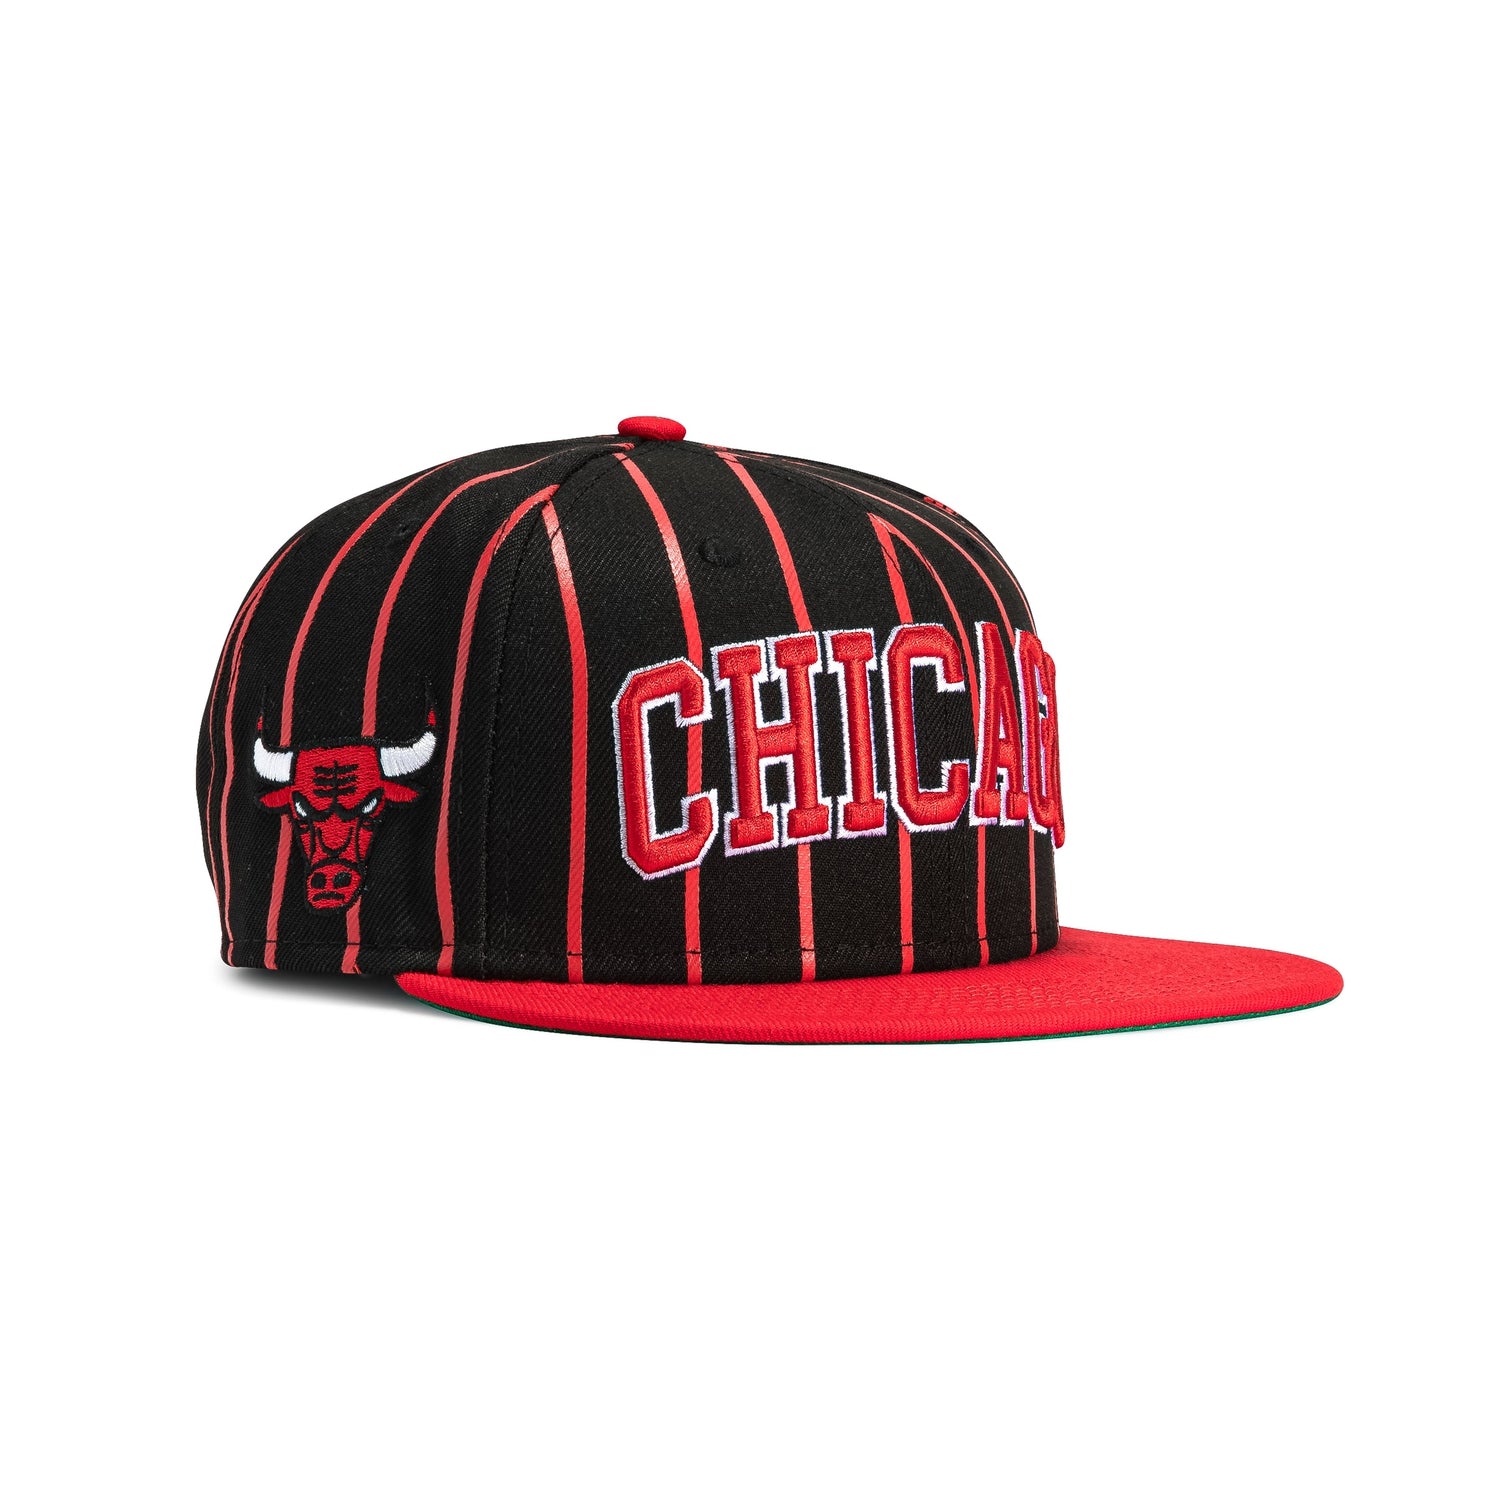 Chicago Bulls Mitchell and Ness Snapback Cap Hat Red Logo Embroidered